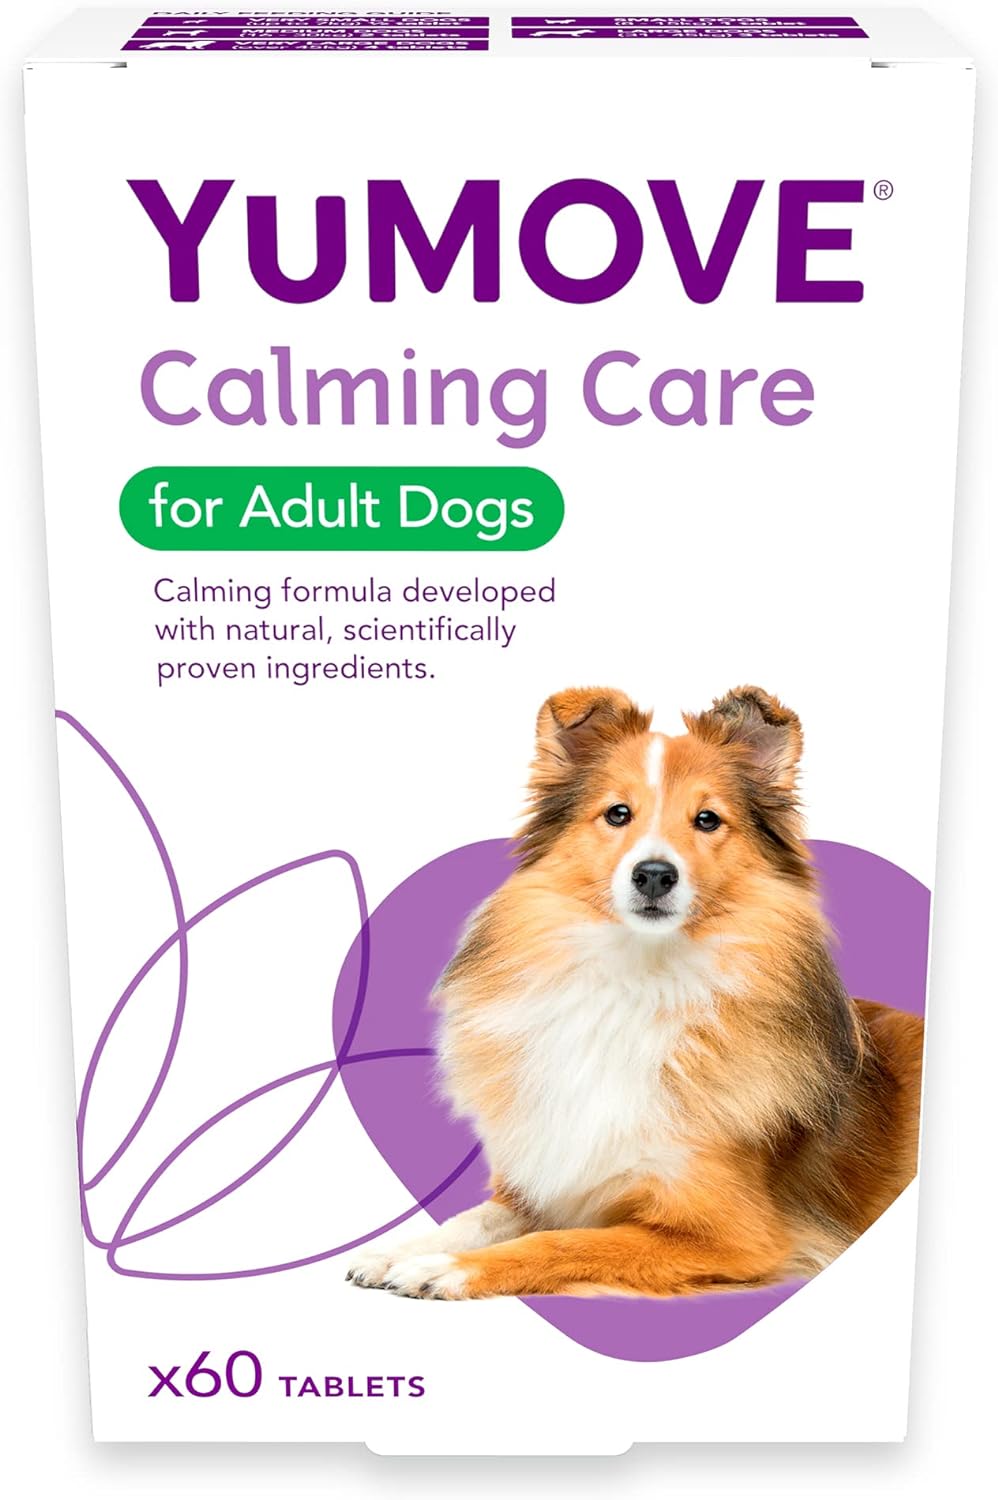 YuMOVE Calming Care for Adult Dogs